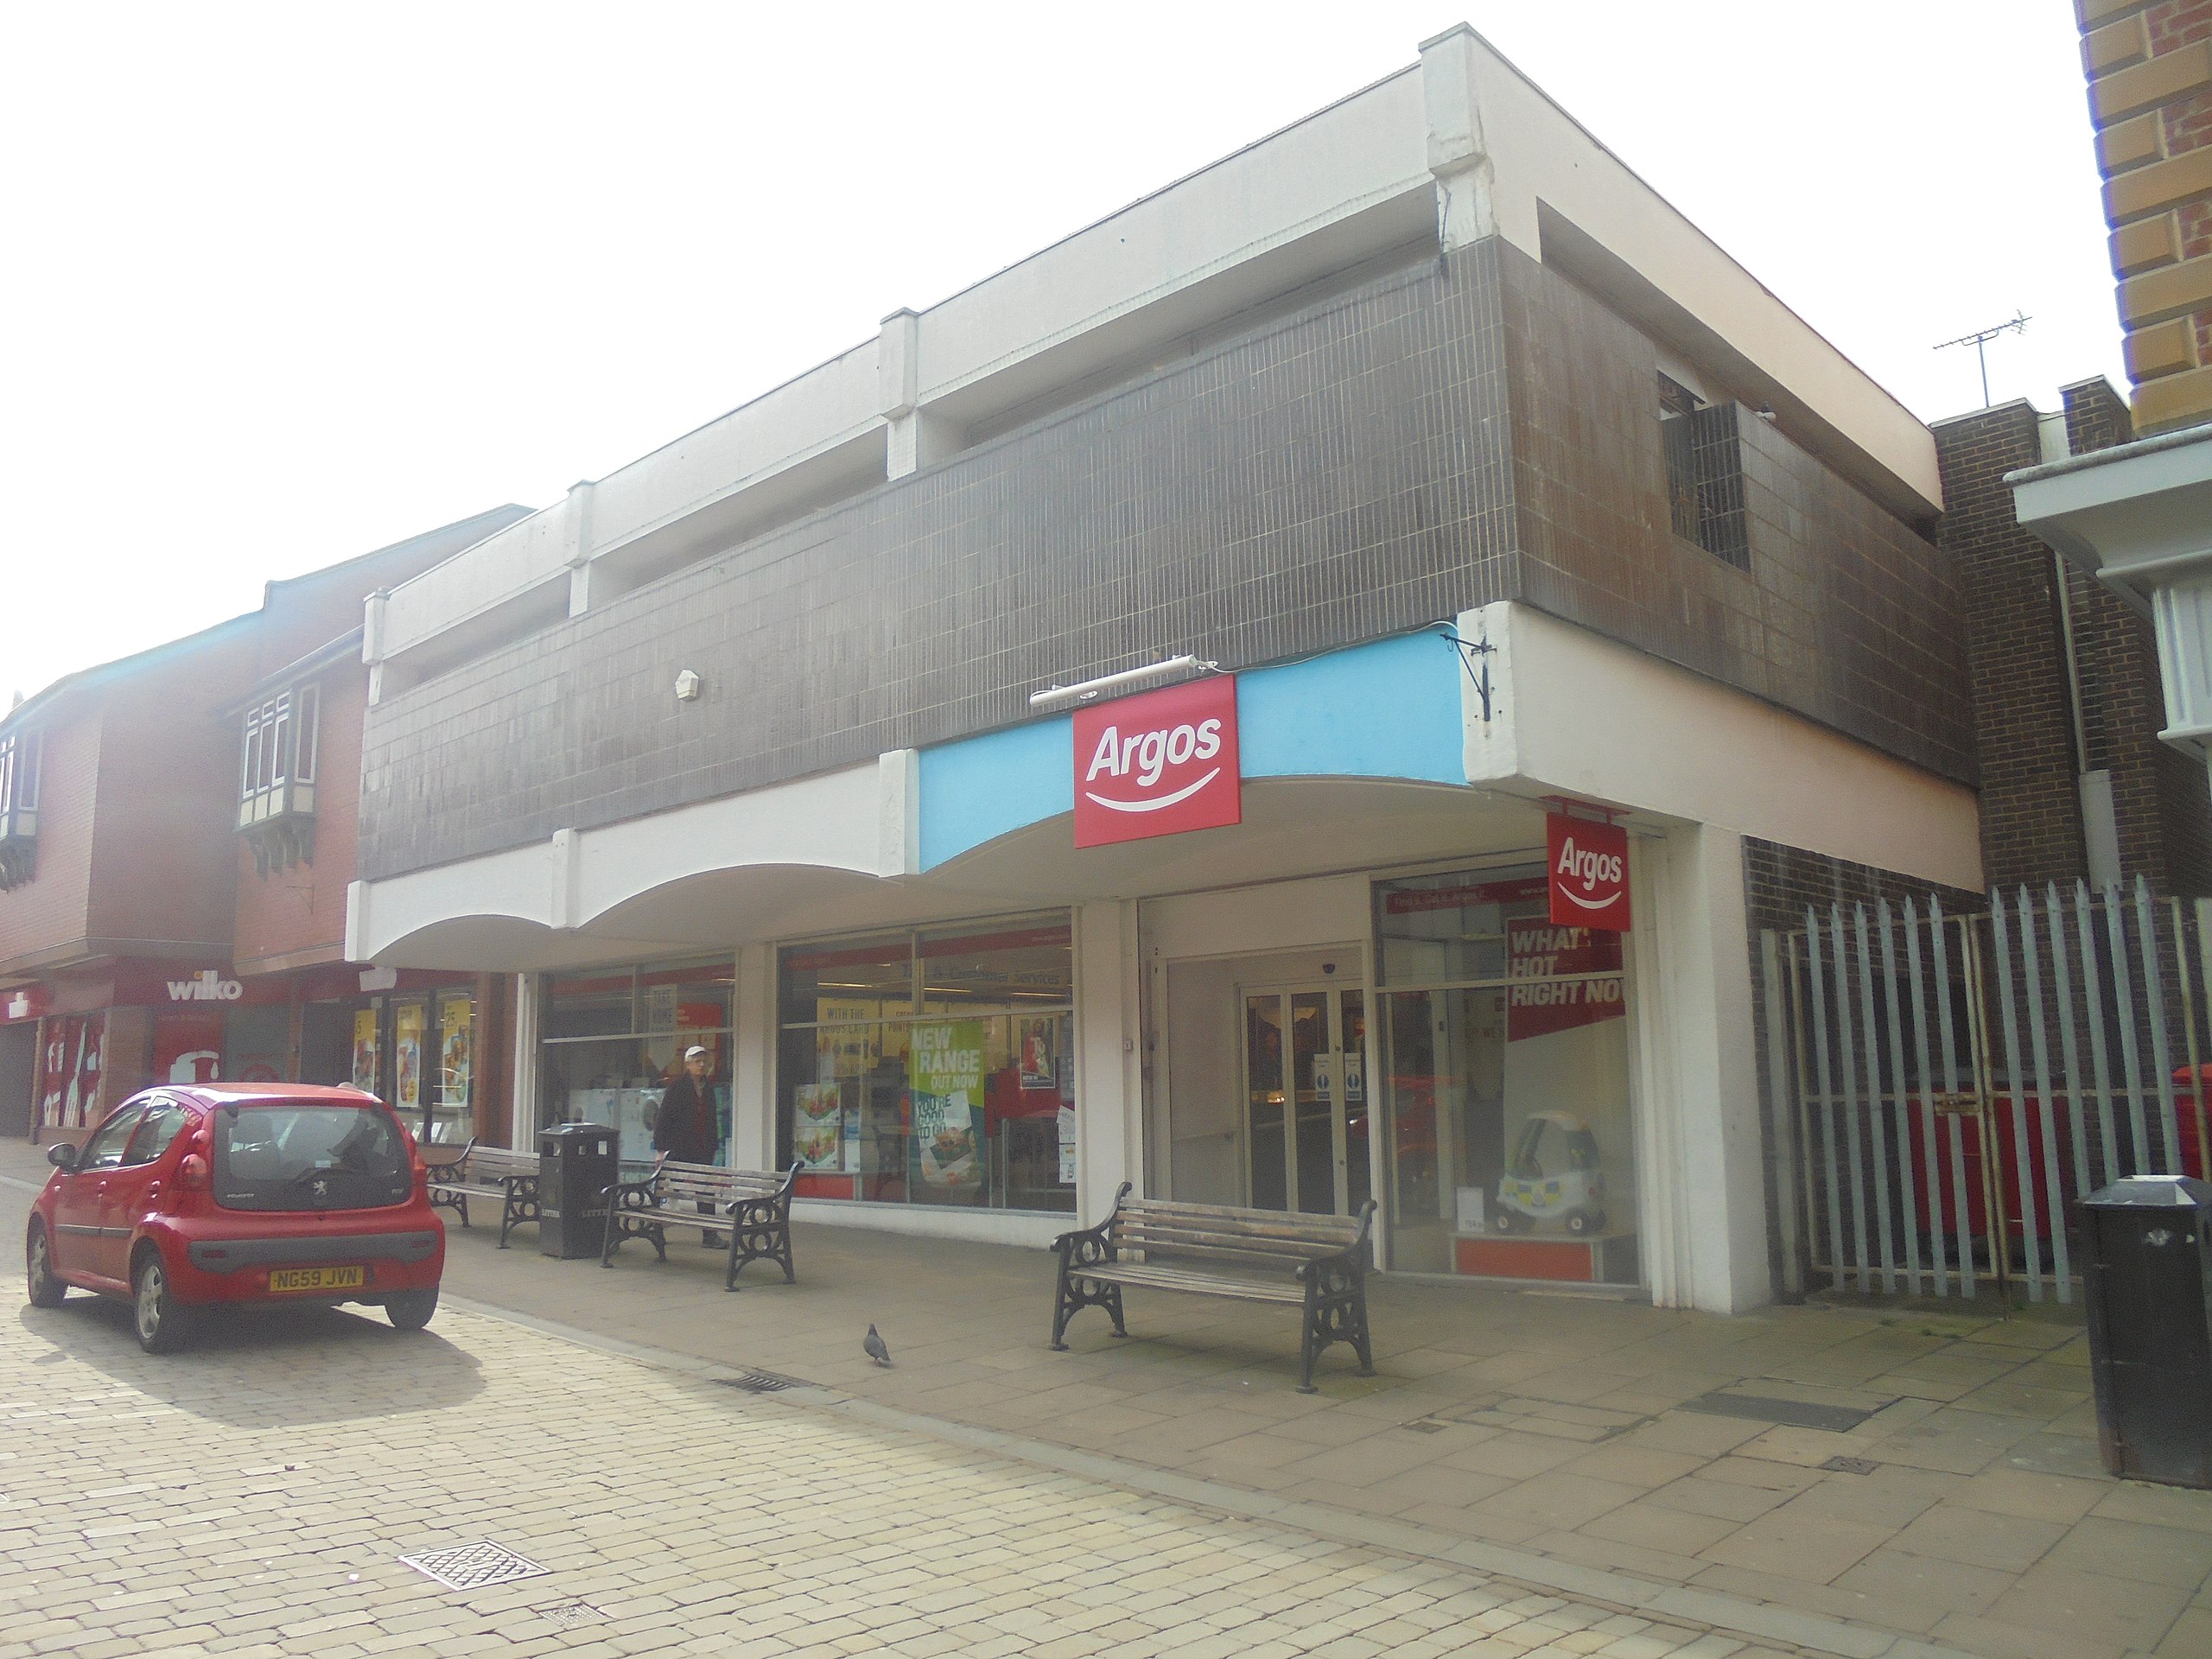 Photograph of an Argos store taken by Mtaylor848